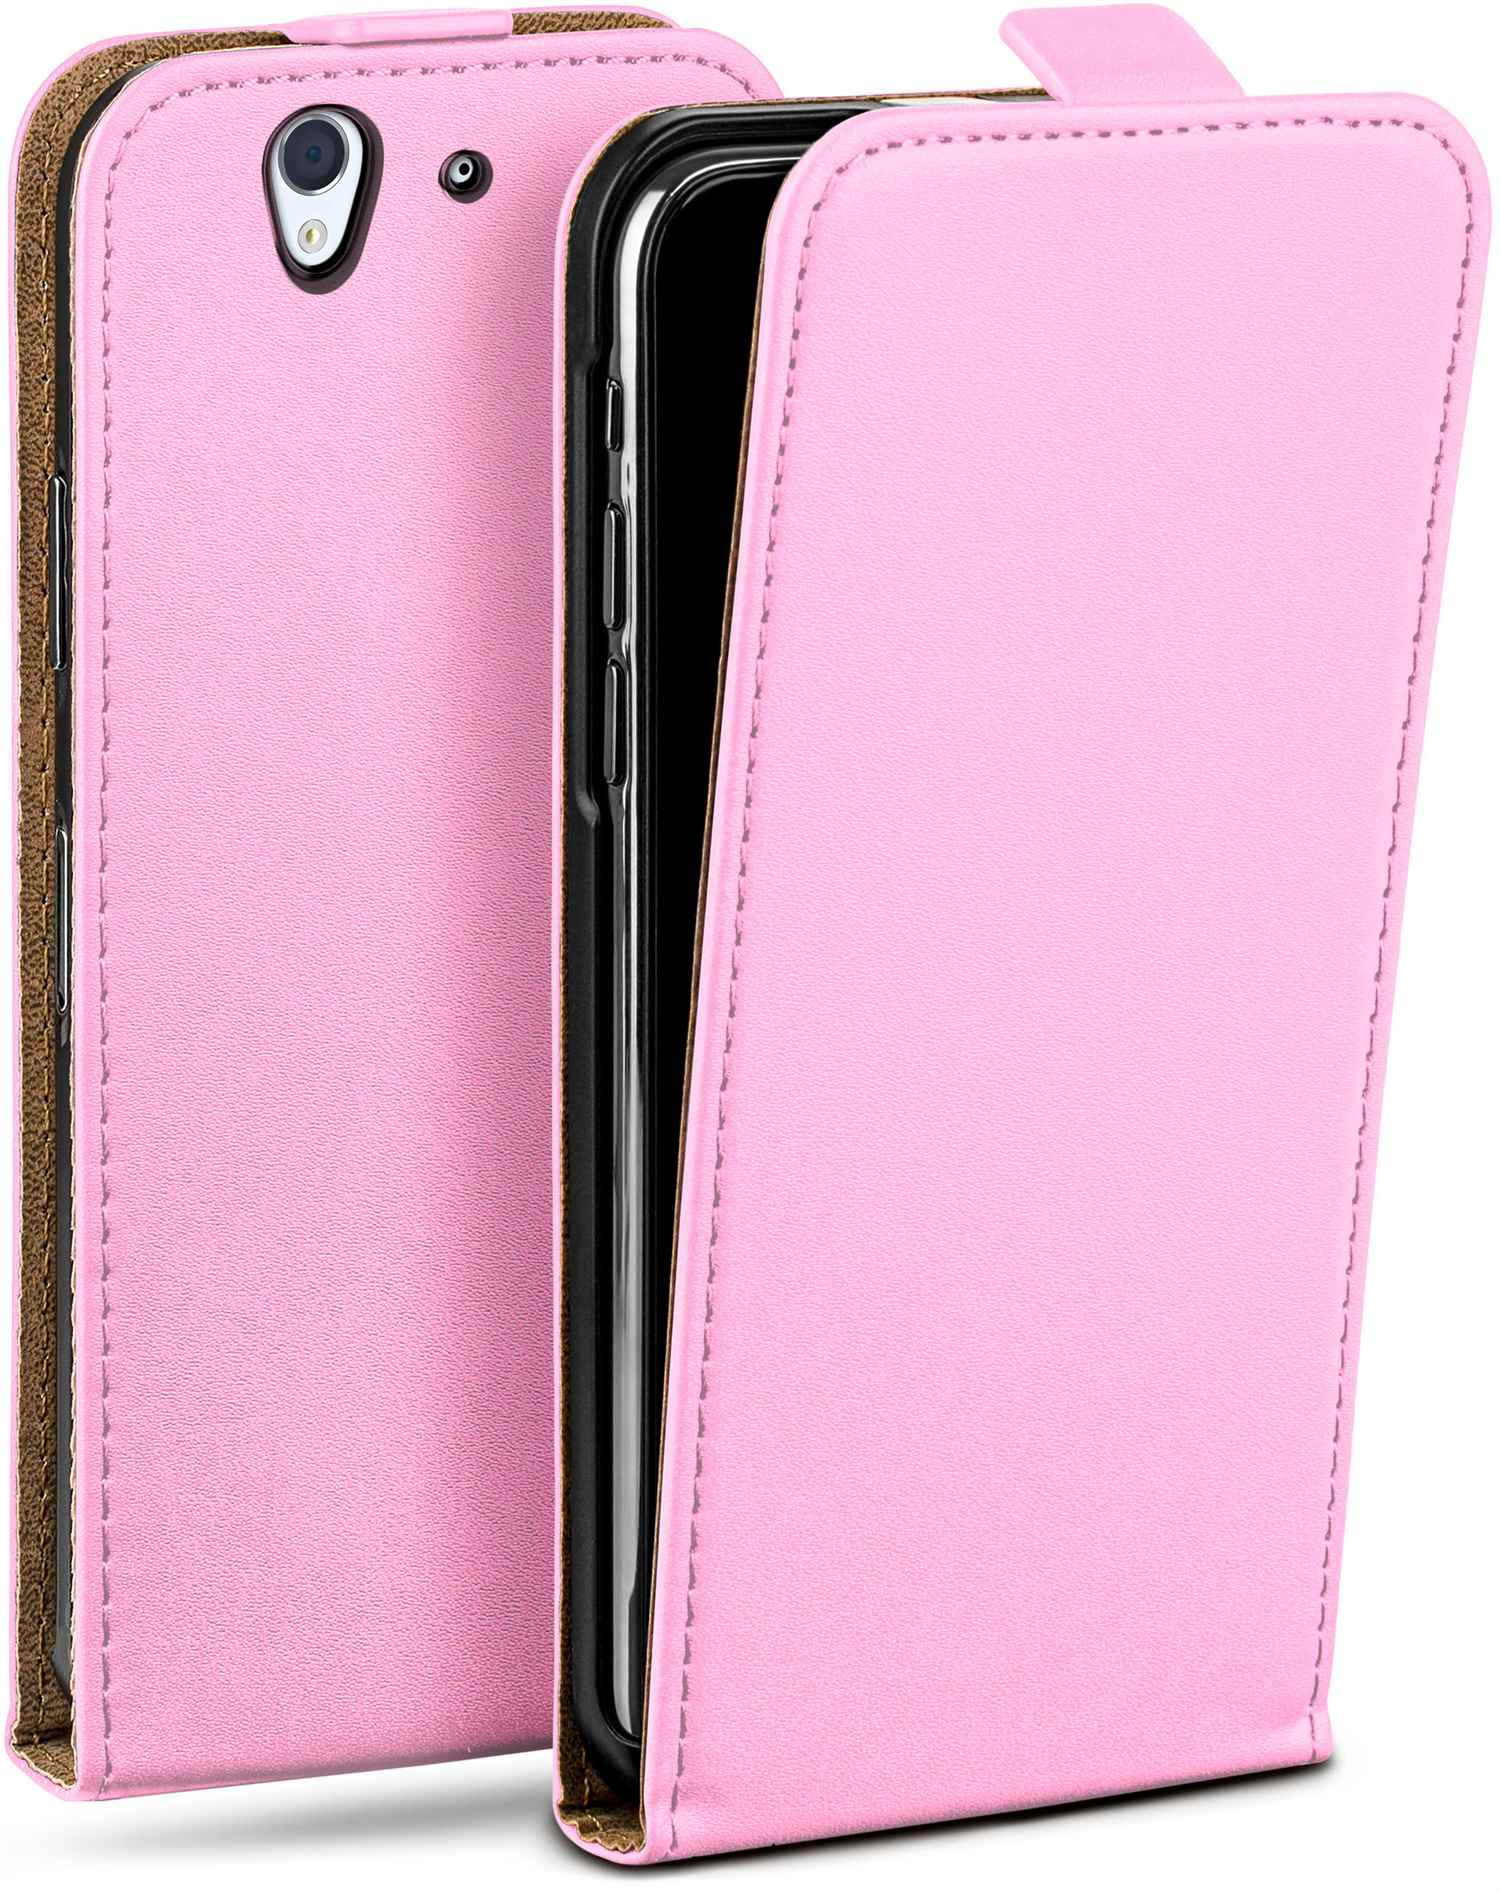 MOEX Xperia Sony, Case, Cover, Flip Flip Icy-Pink Z,